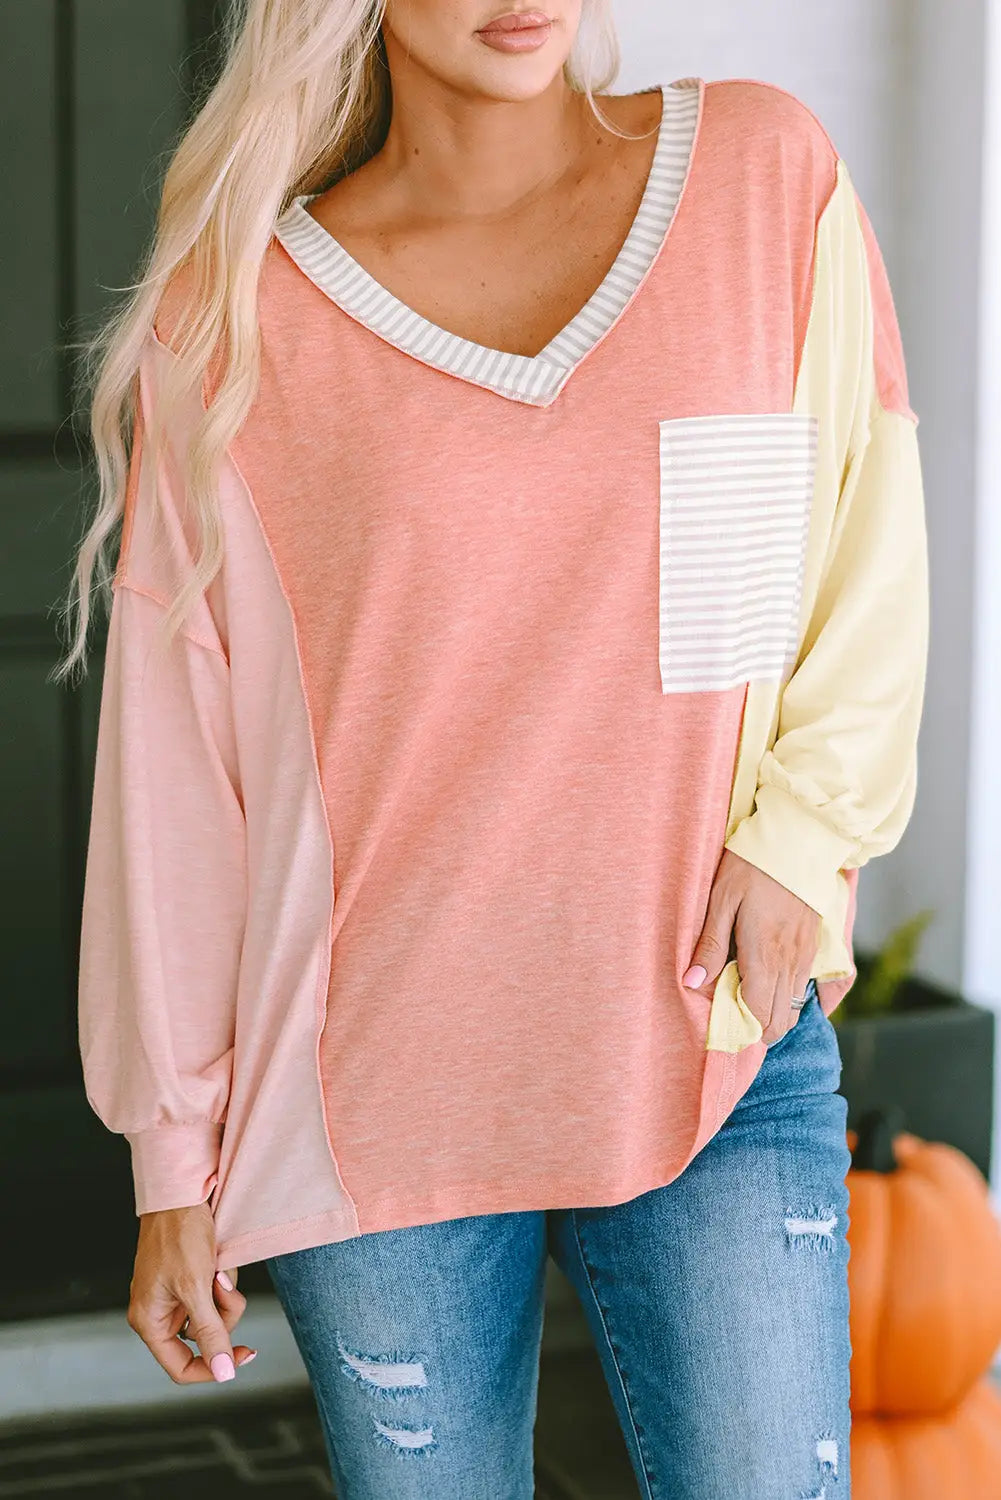 Striped color block splicing long sleeve t shirt - tops